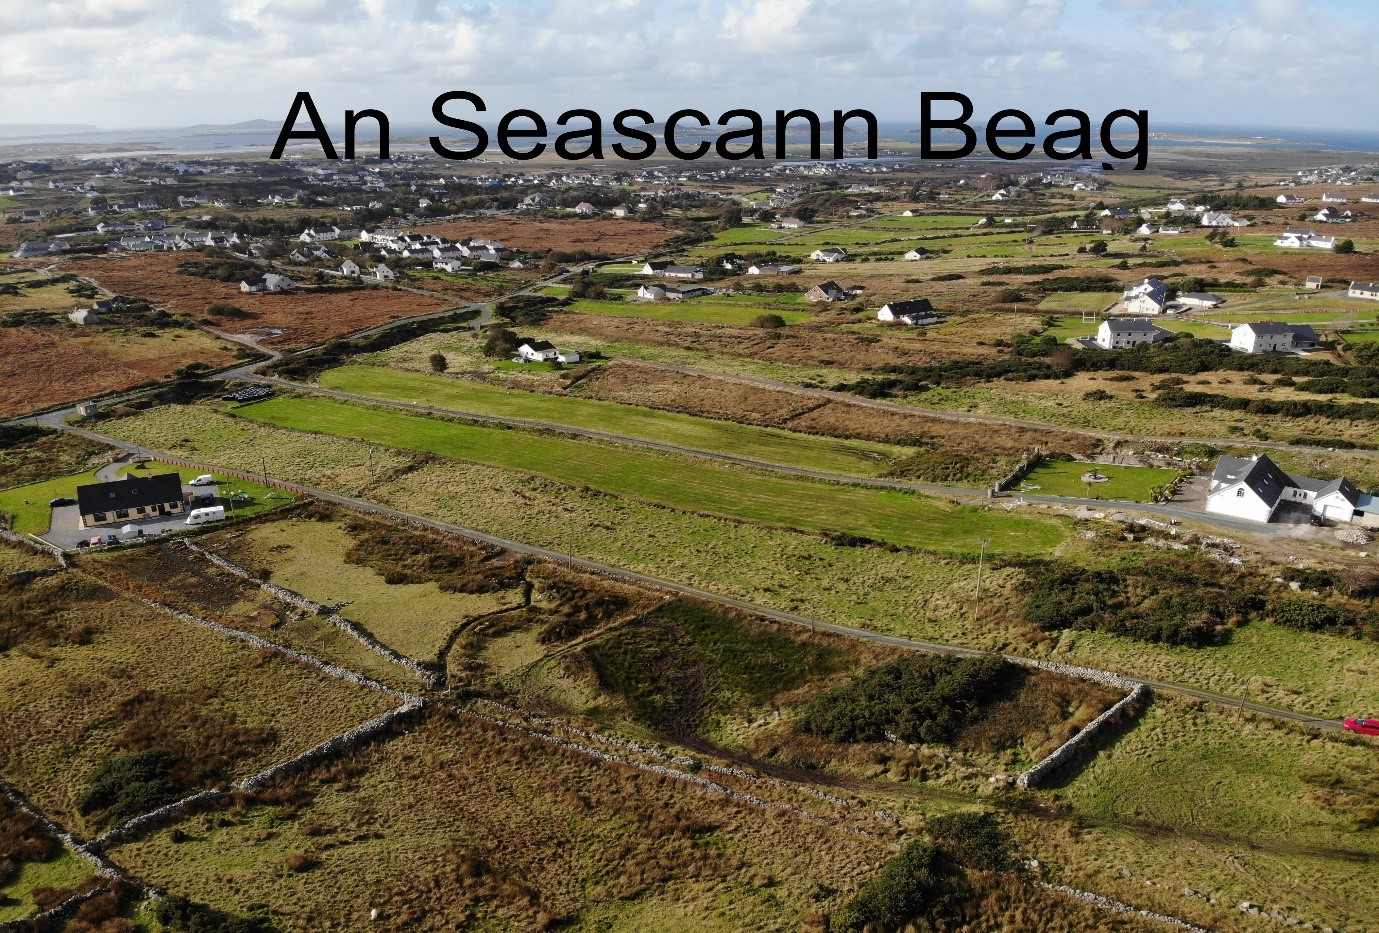 0.80 ACRE SITE IN SHESKINBEG, DERRYBEG, CO. DONEGAL.